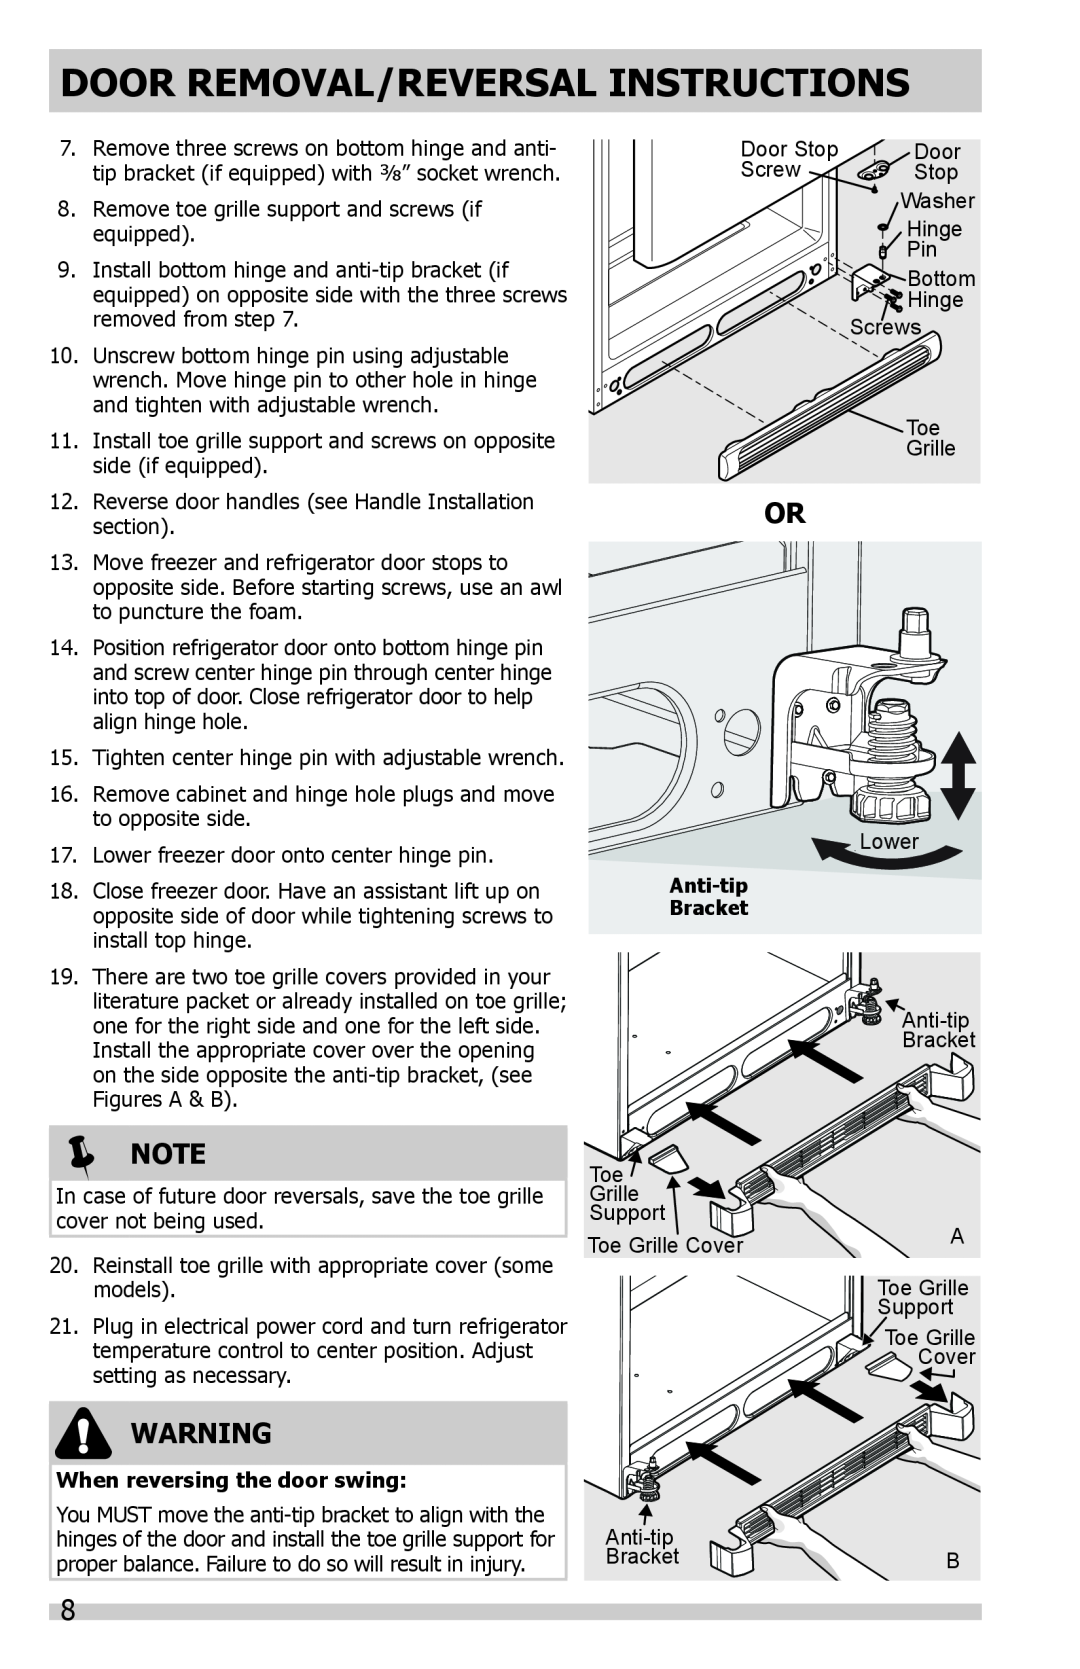 Frigidaire FFTR1821QW Door Removal/Reversal Instructions,  Note, Remove toe grille support and screws if equipped 